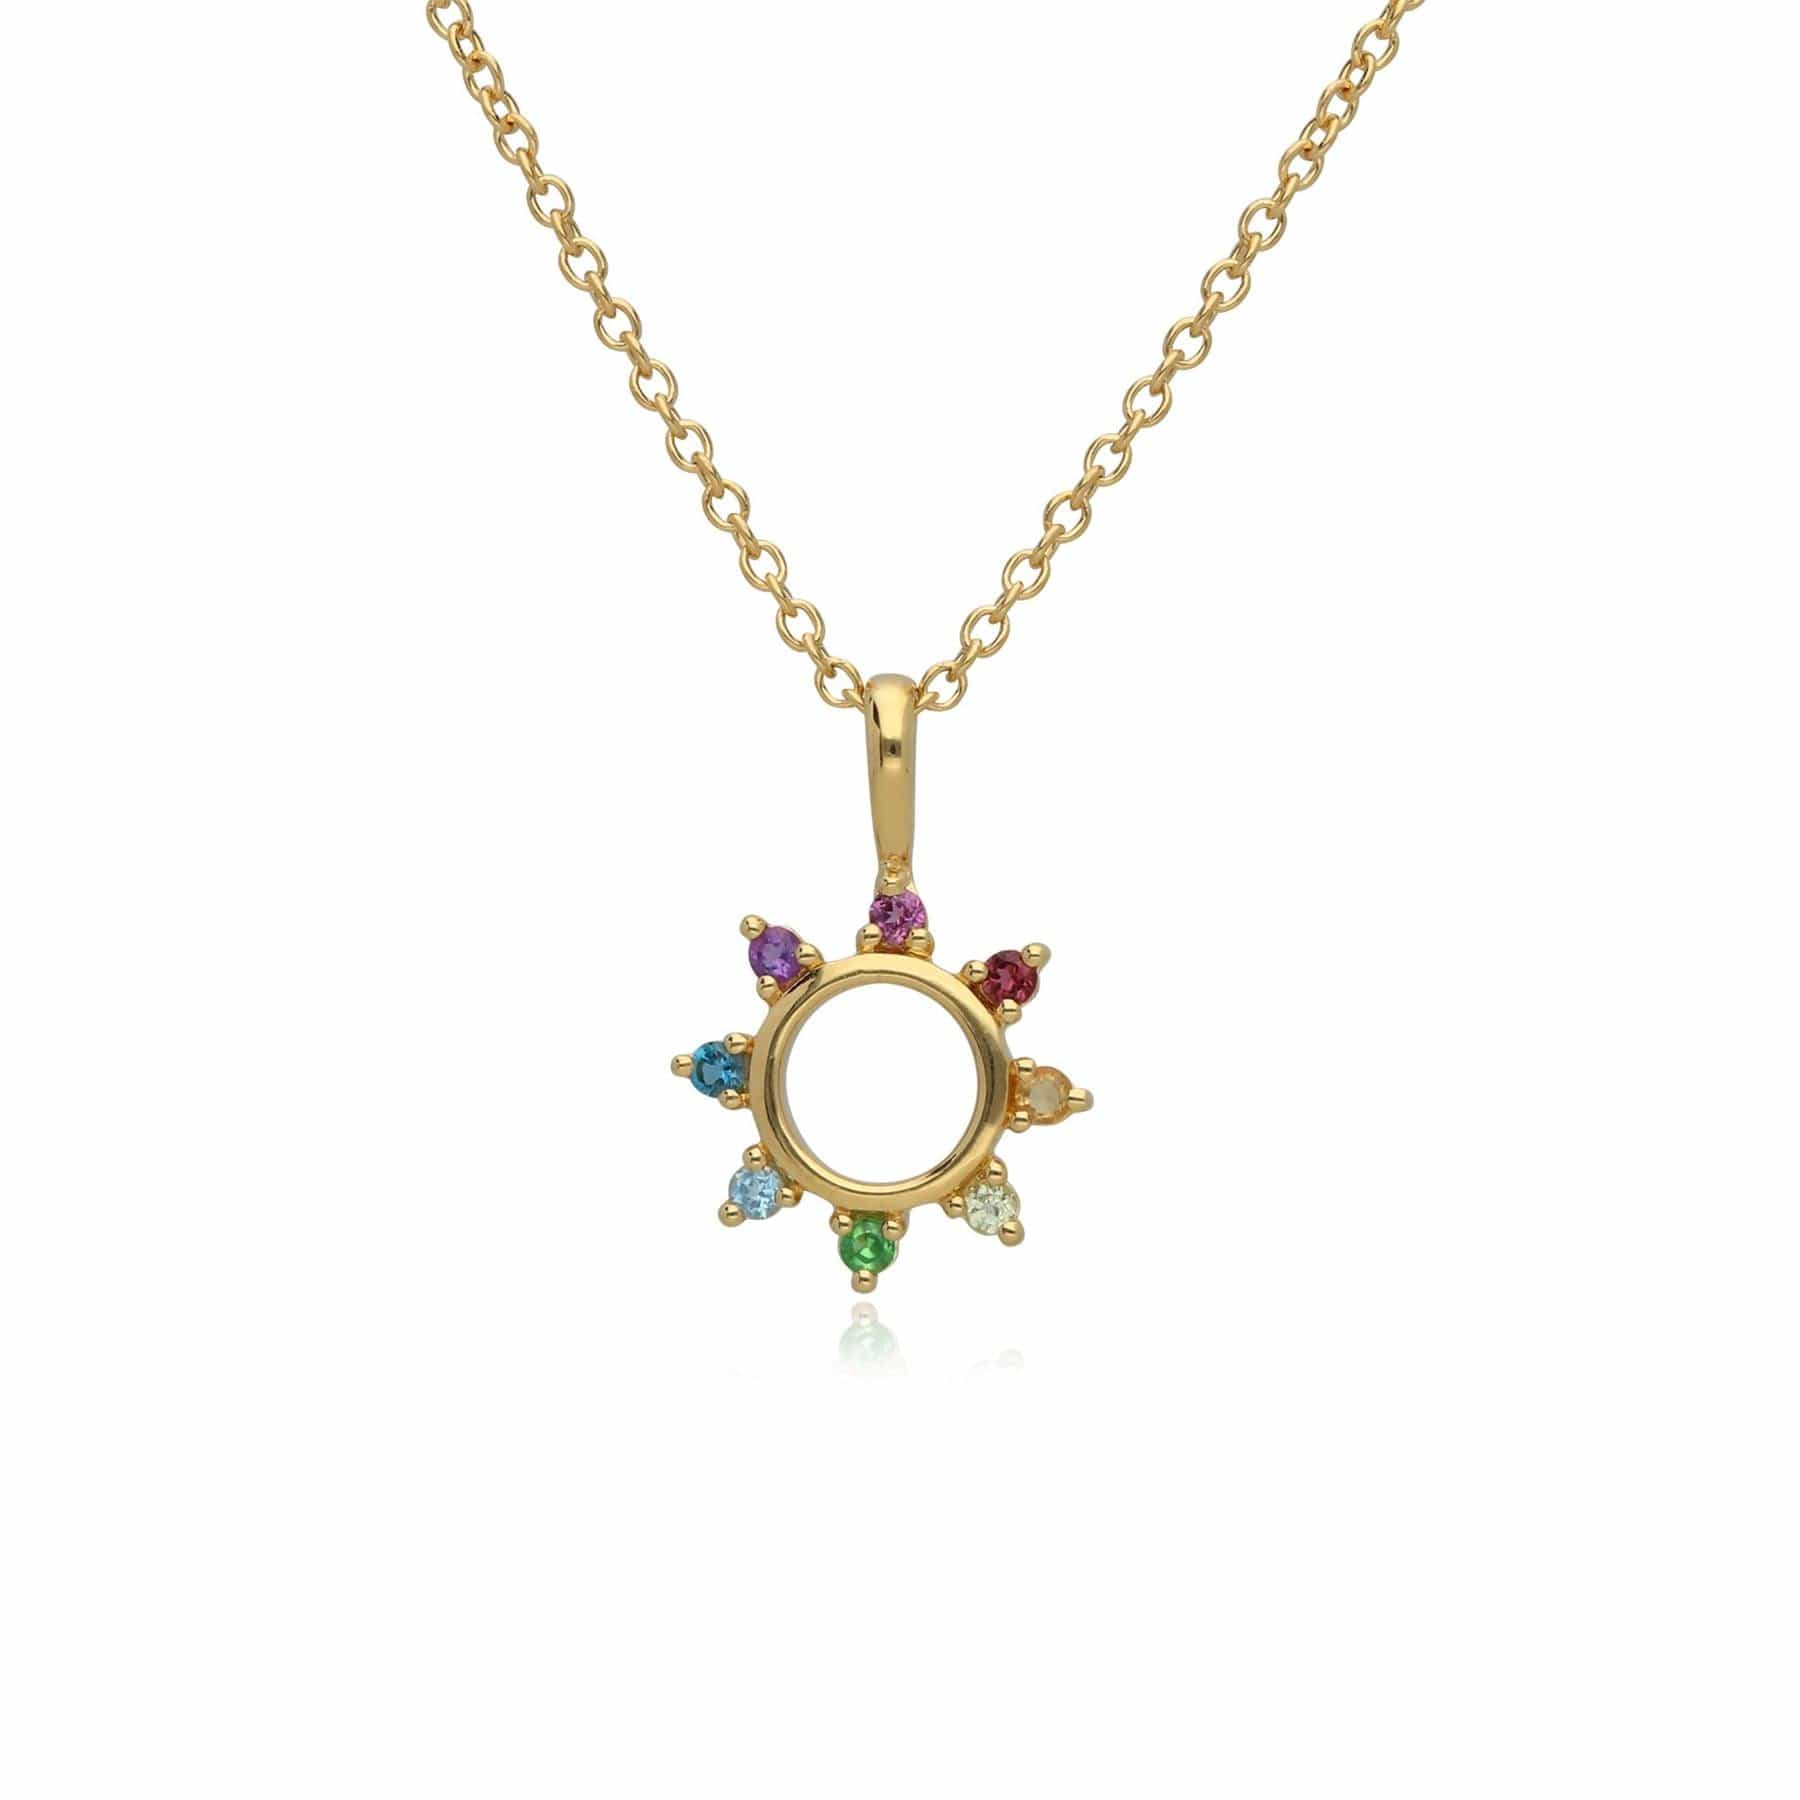 270N036301925 Rainbow Sunburst Necklace in Gold Plated Sterling Silver 1